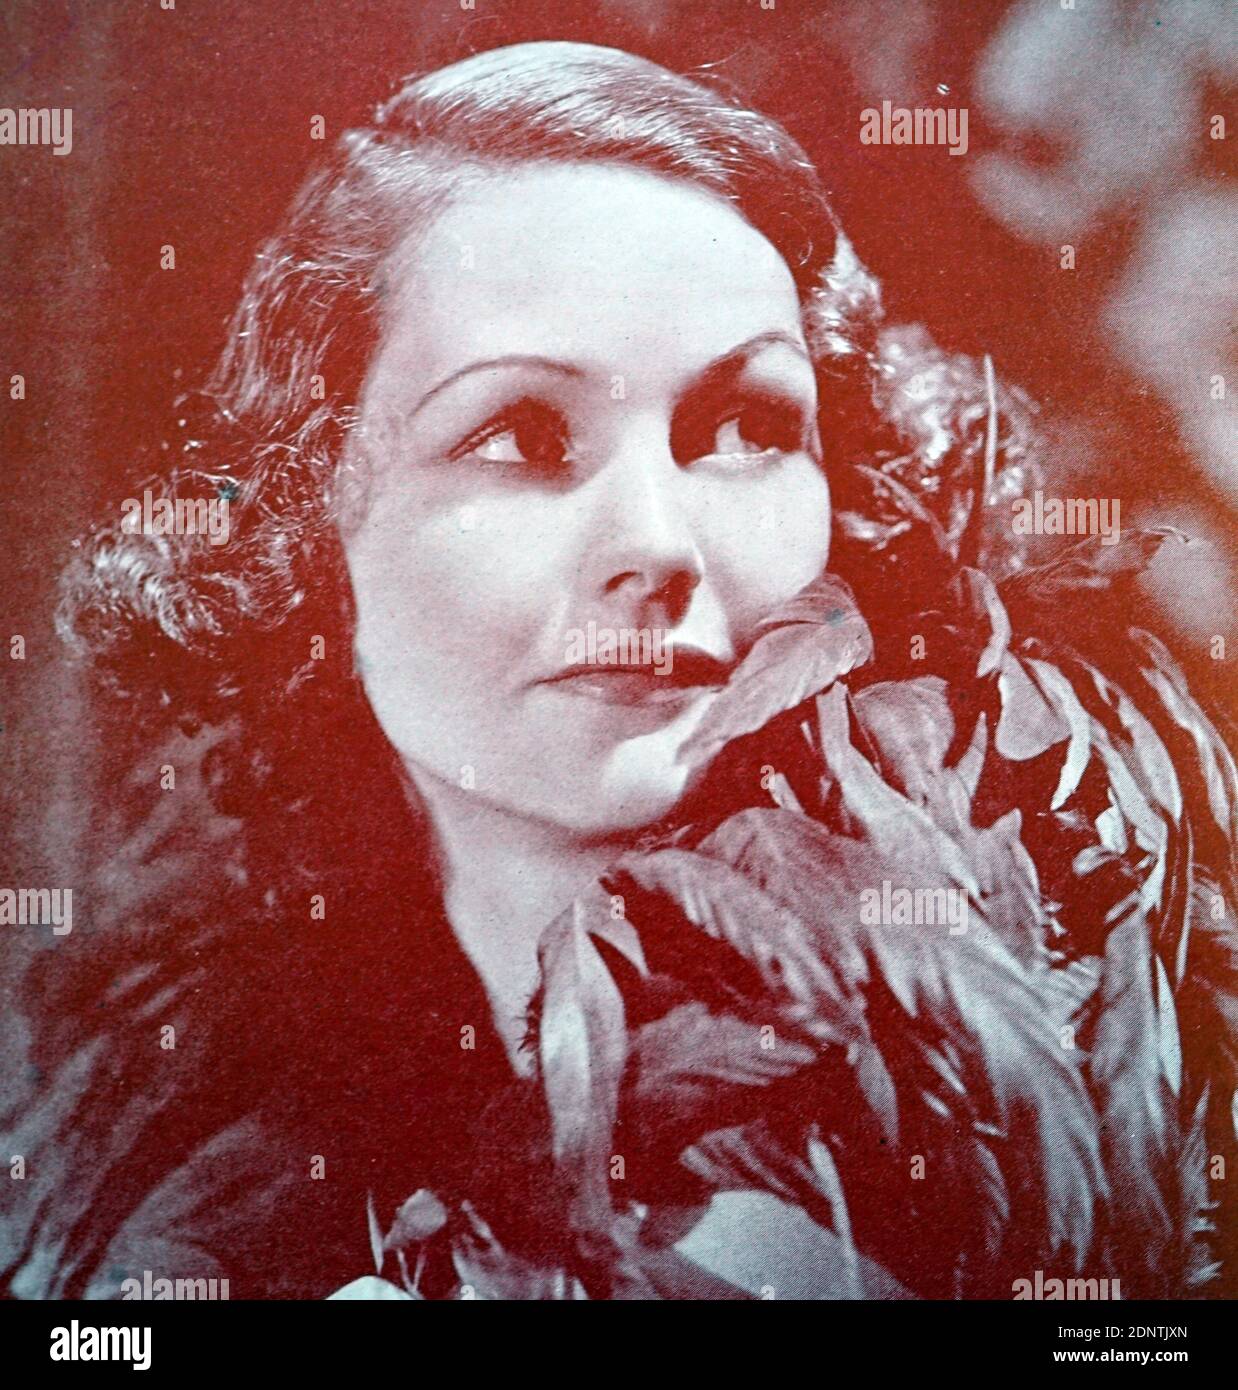 Photograph of Elizabeth Allan (1910-1990) an English stage and film actress. Stock Photo